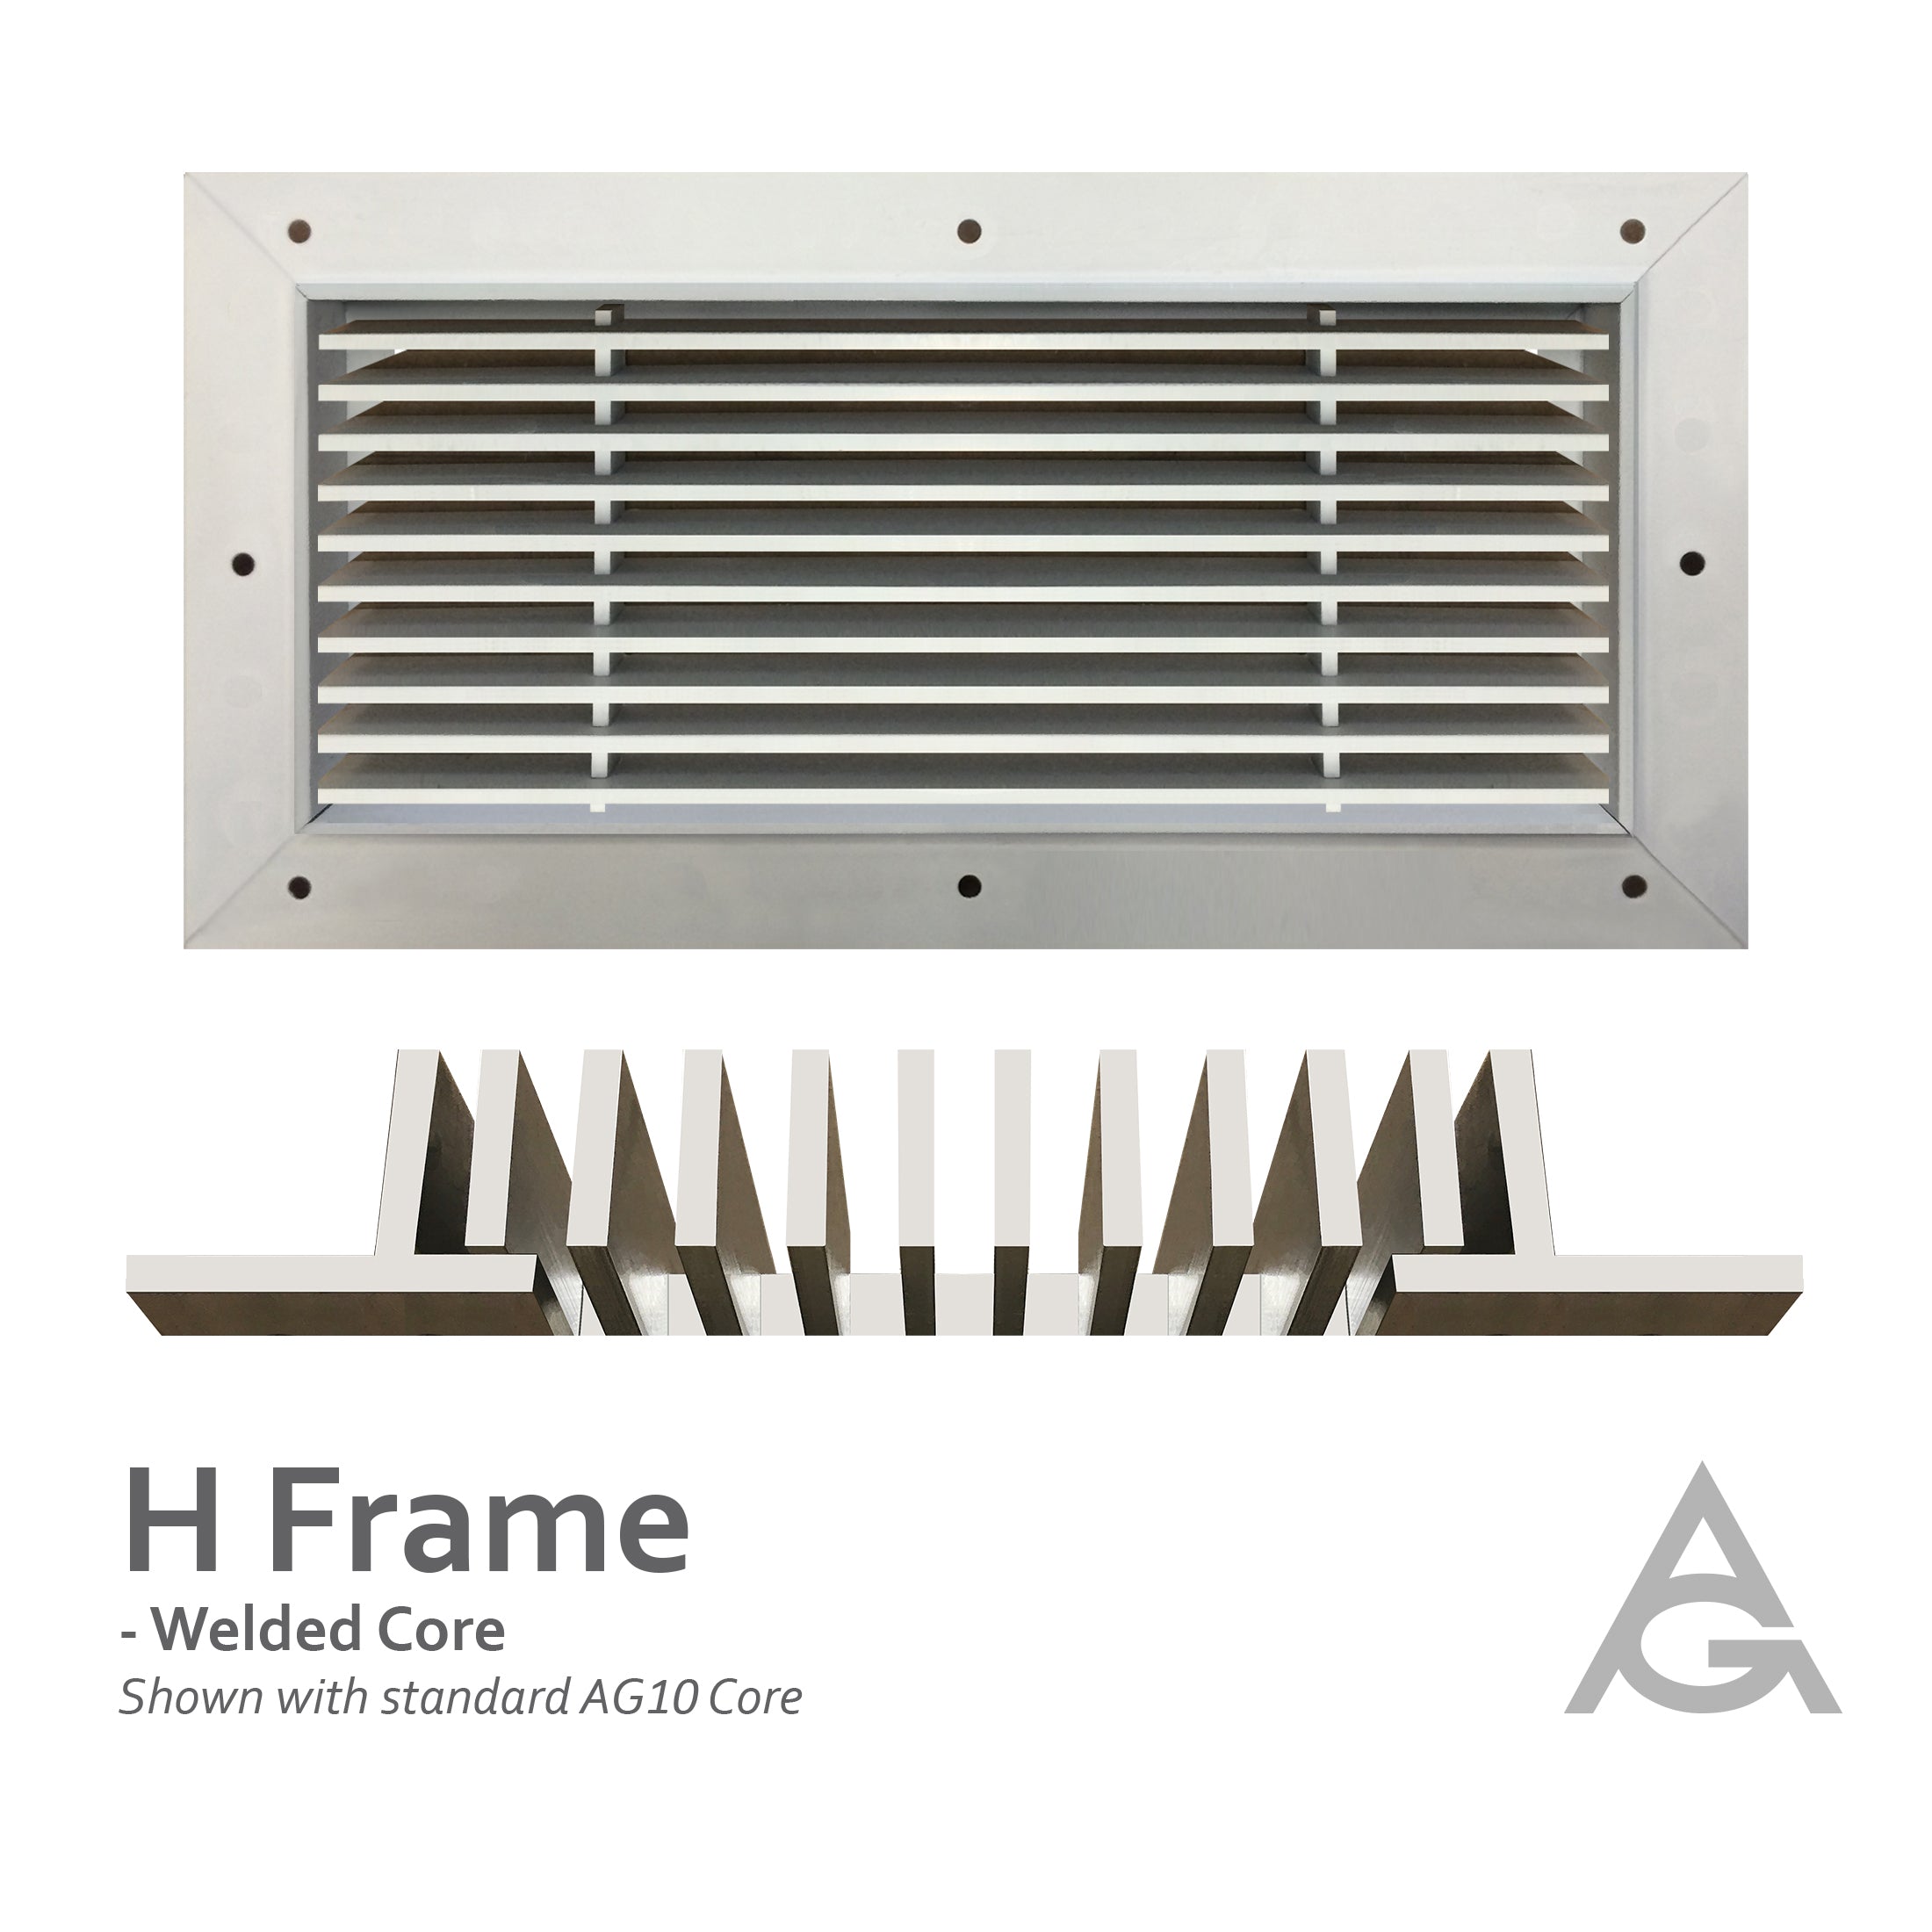 H Frame: Welded Core